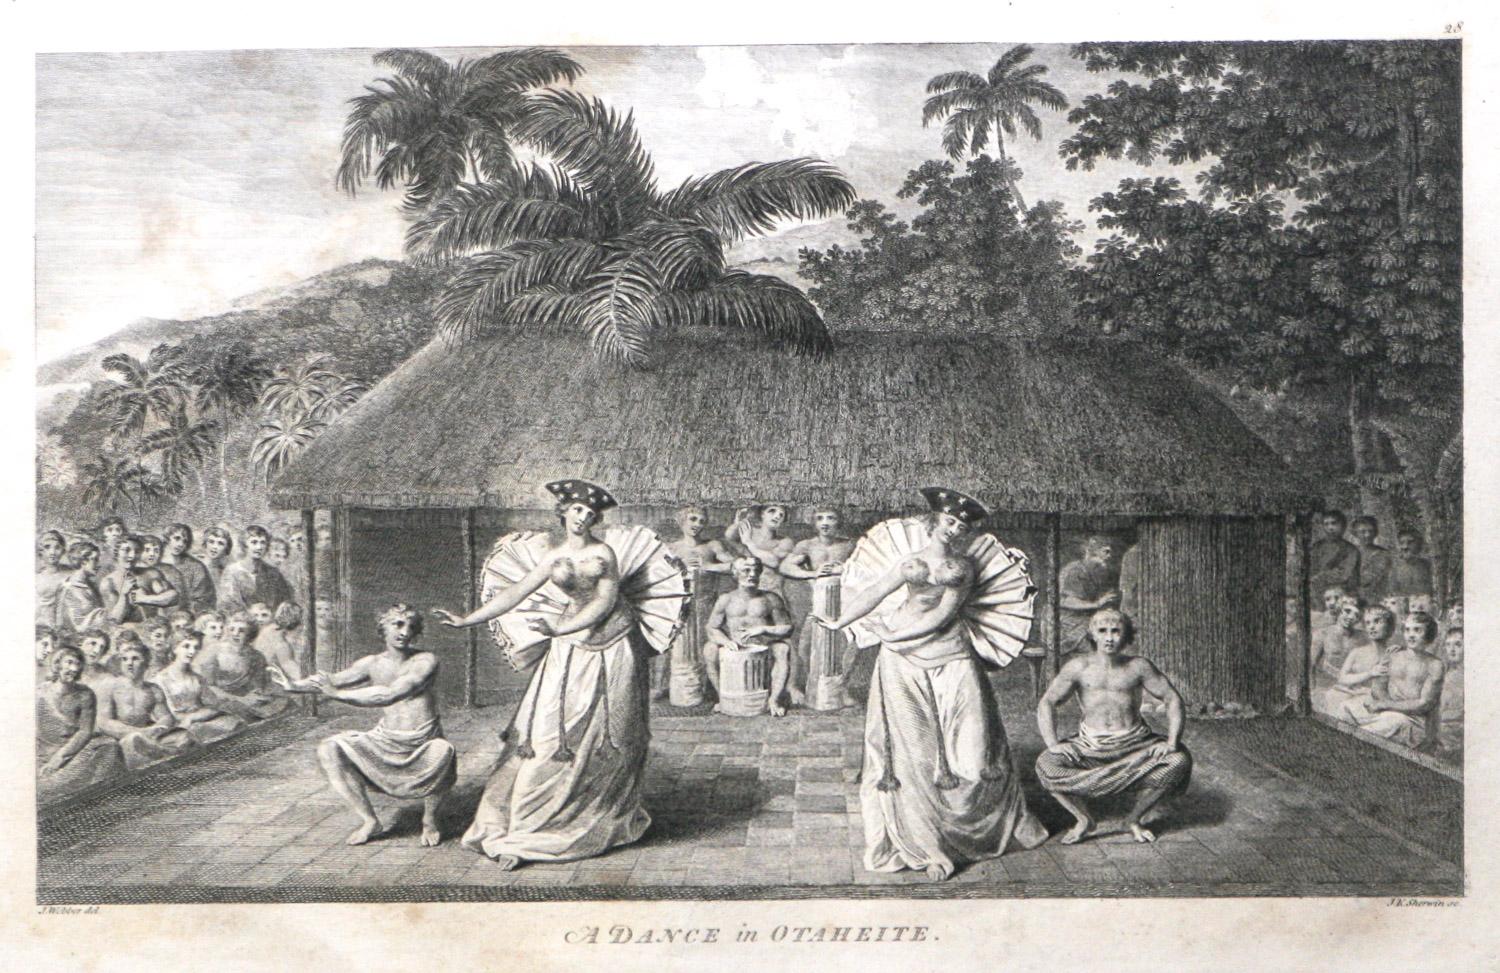 A Dance in Otaheite ( Tahiti ) is from the 1784 First Edition Atlas Accompanying Capt. James Cook and King; Third and Final Voyage of Captain James Cook. John Webber (1752-1793)  who was the official artist for the third voyage of Captain James Cook